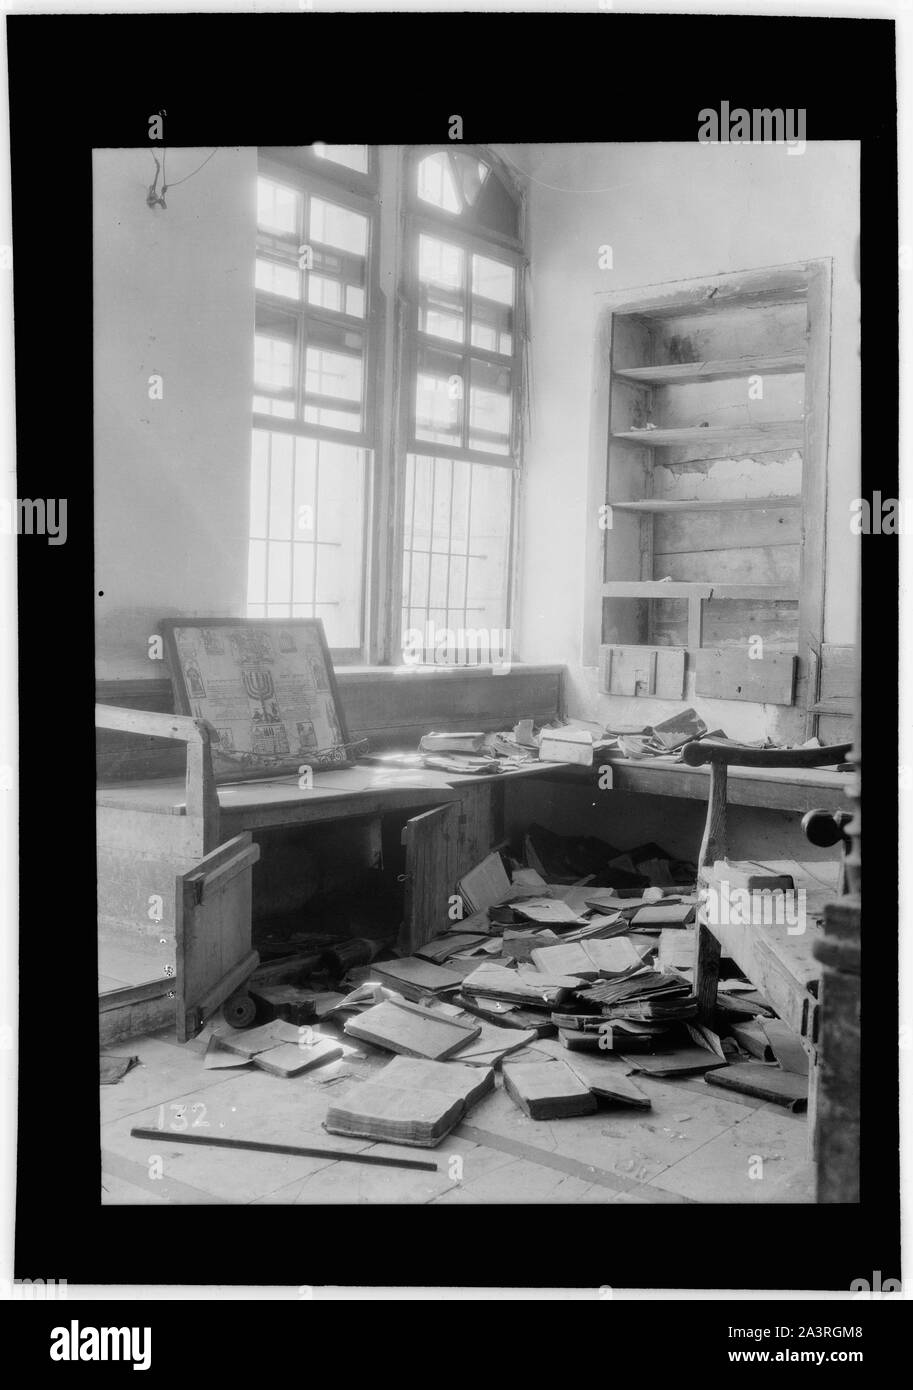 Palestine events. The 1929 riots, August 23 to 31. Synagogue desecrated by Arab rioters. Sacred books torn and scattered on the floor. Stock Photo